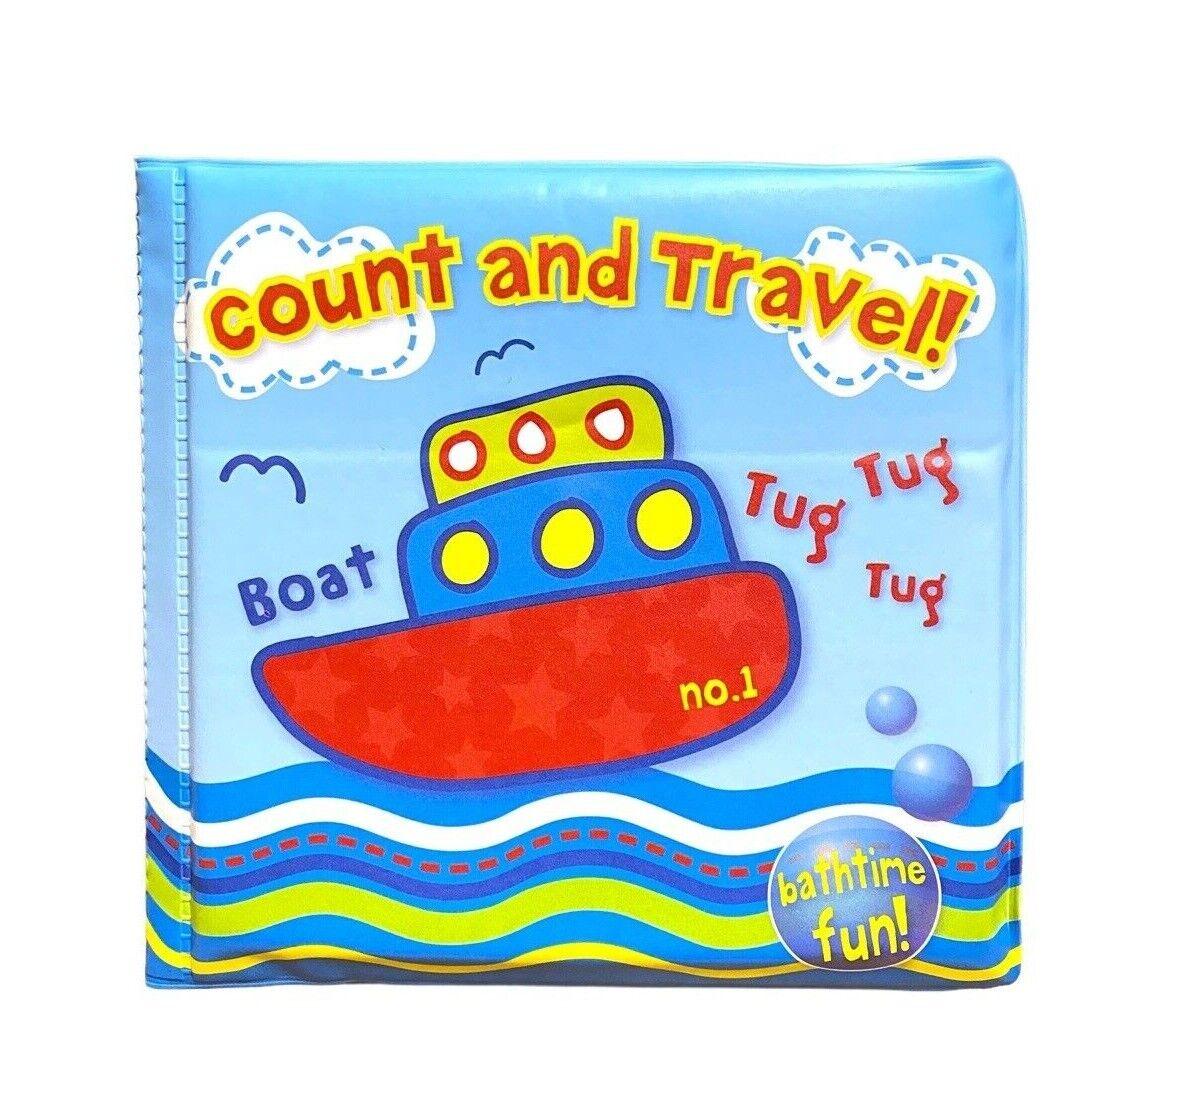 Pack of 2 Count and Travel Jungle Baby Bath Book Waterproof Reading Toy